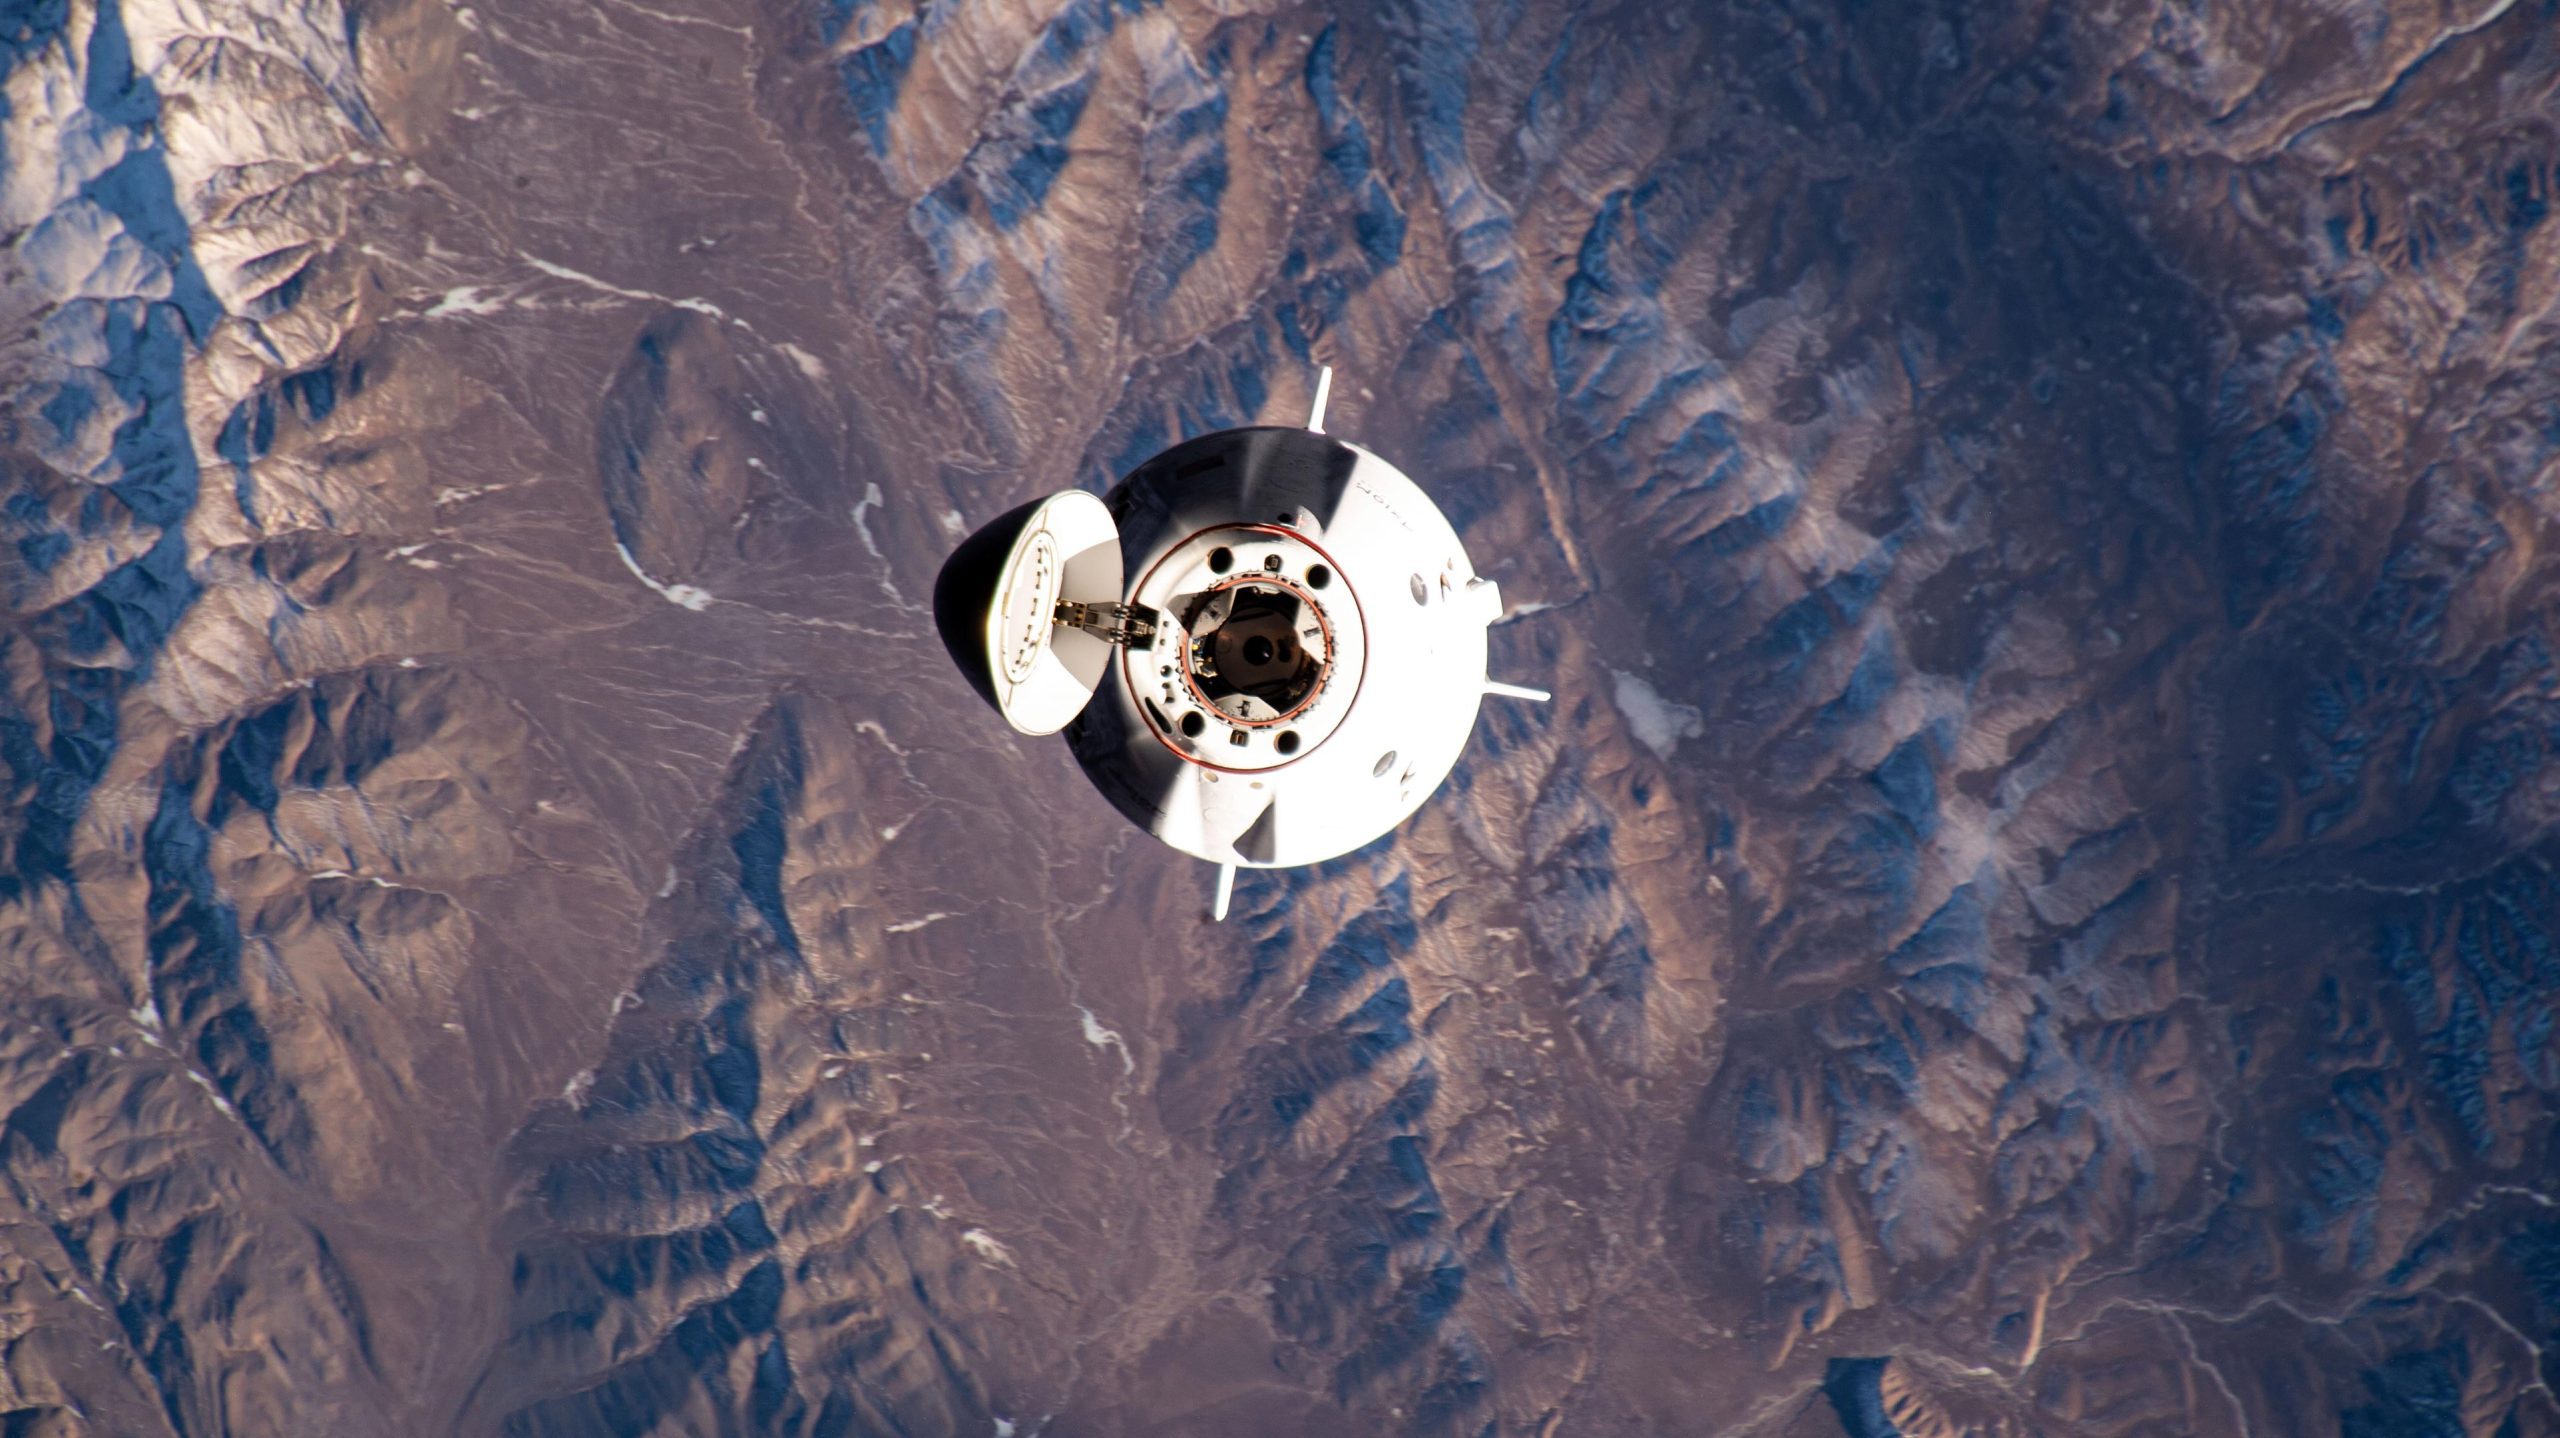 Ax 3 SpaceX Dragon Freedom Spacecraft Approaches Space Station scaled jpg